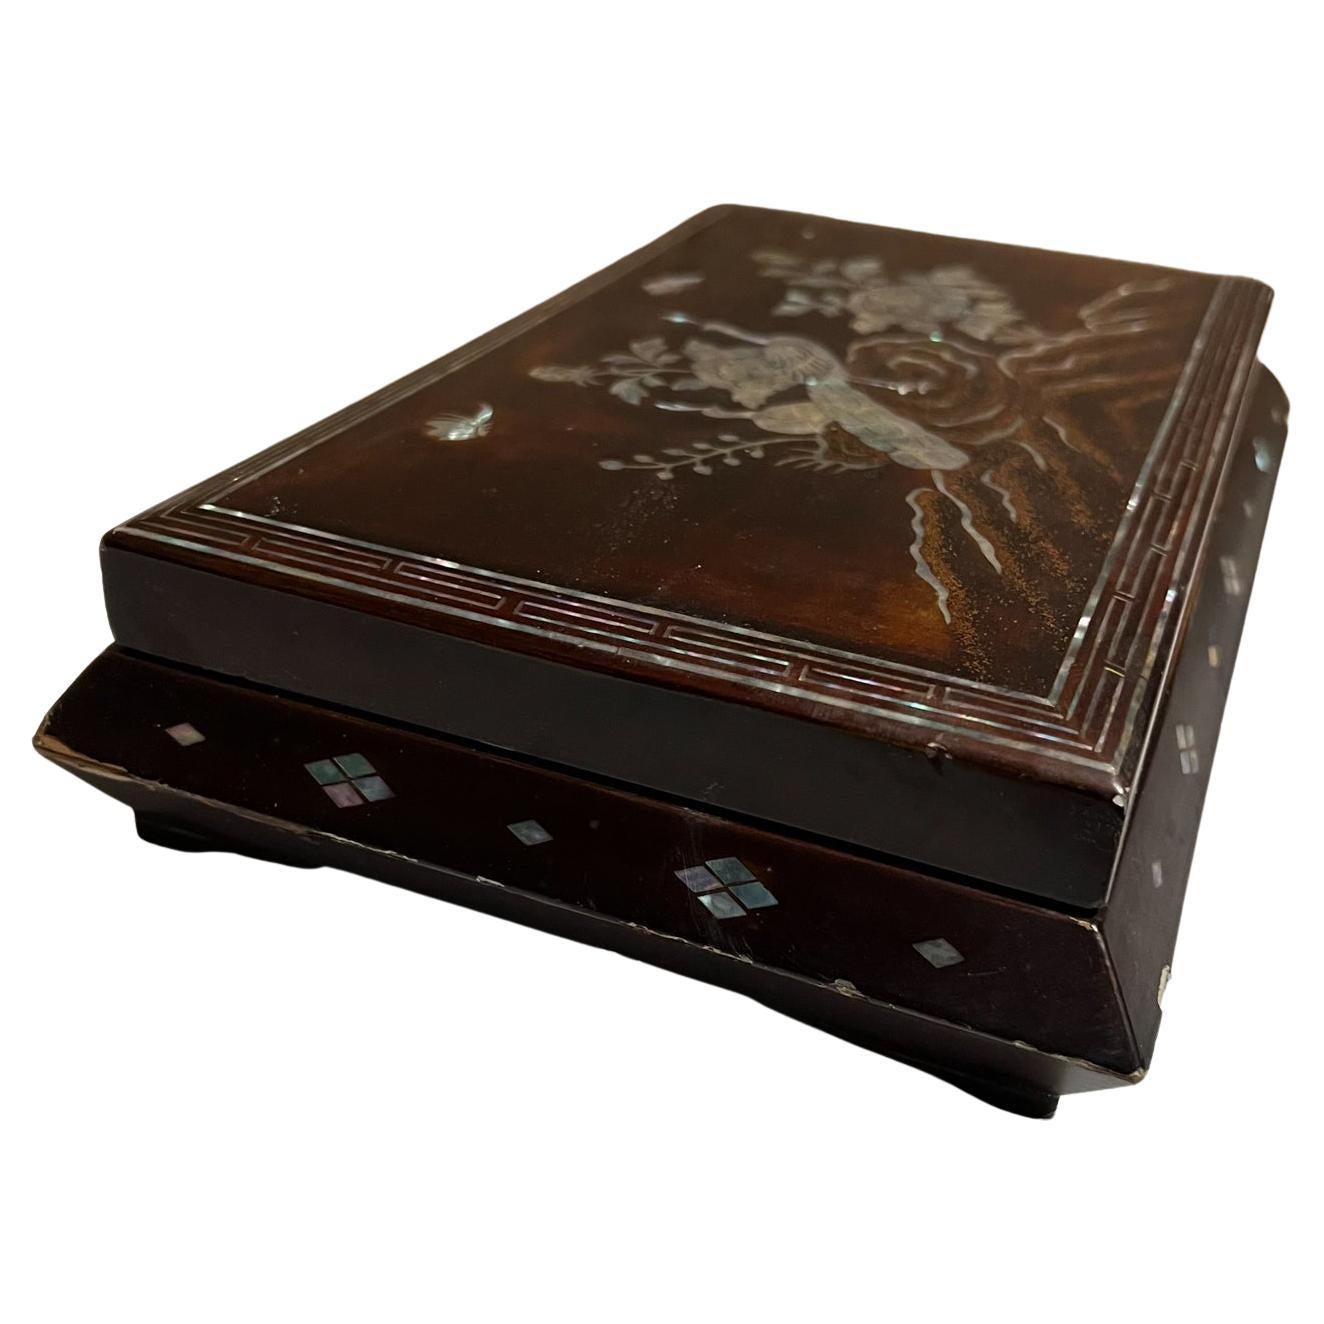 Antique Asian Chinese Oriental Vintage Smoke Tobacco Box
Interior Compartments
Intricate decorative Inlay
6.5 d x 10.25 w x 2.25 tall
Personal inscription
Original unrestored vintage condition with wear age showing.
Review all images provided.
